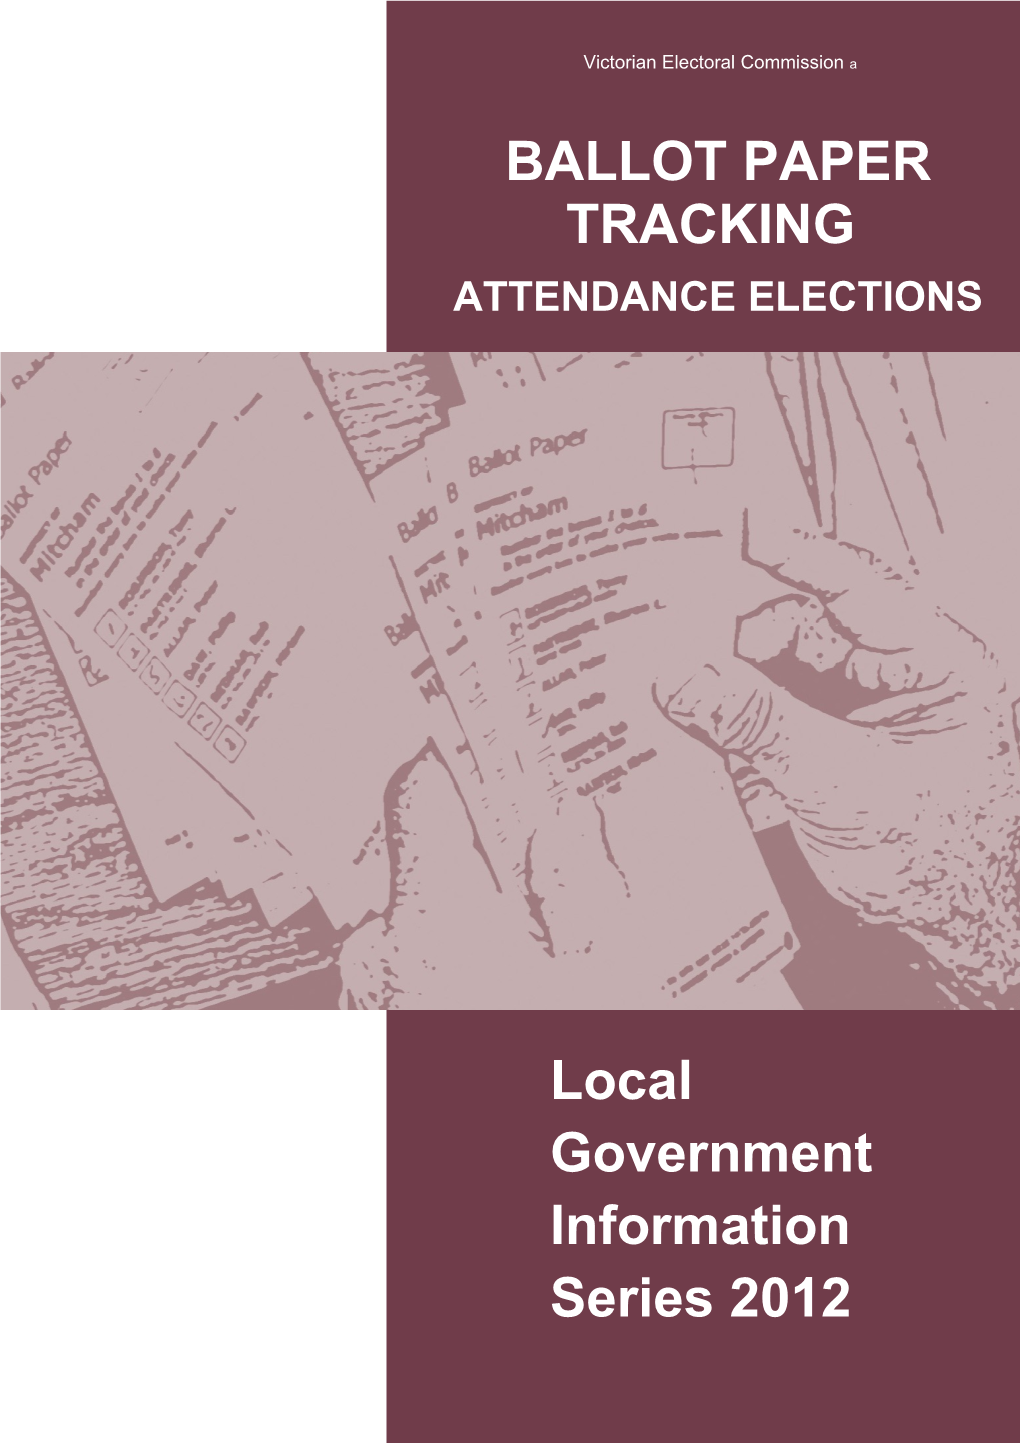 This Document Outlines the Process Followed for Attendance Elections